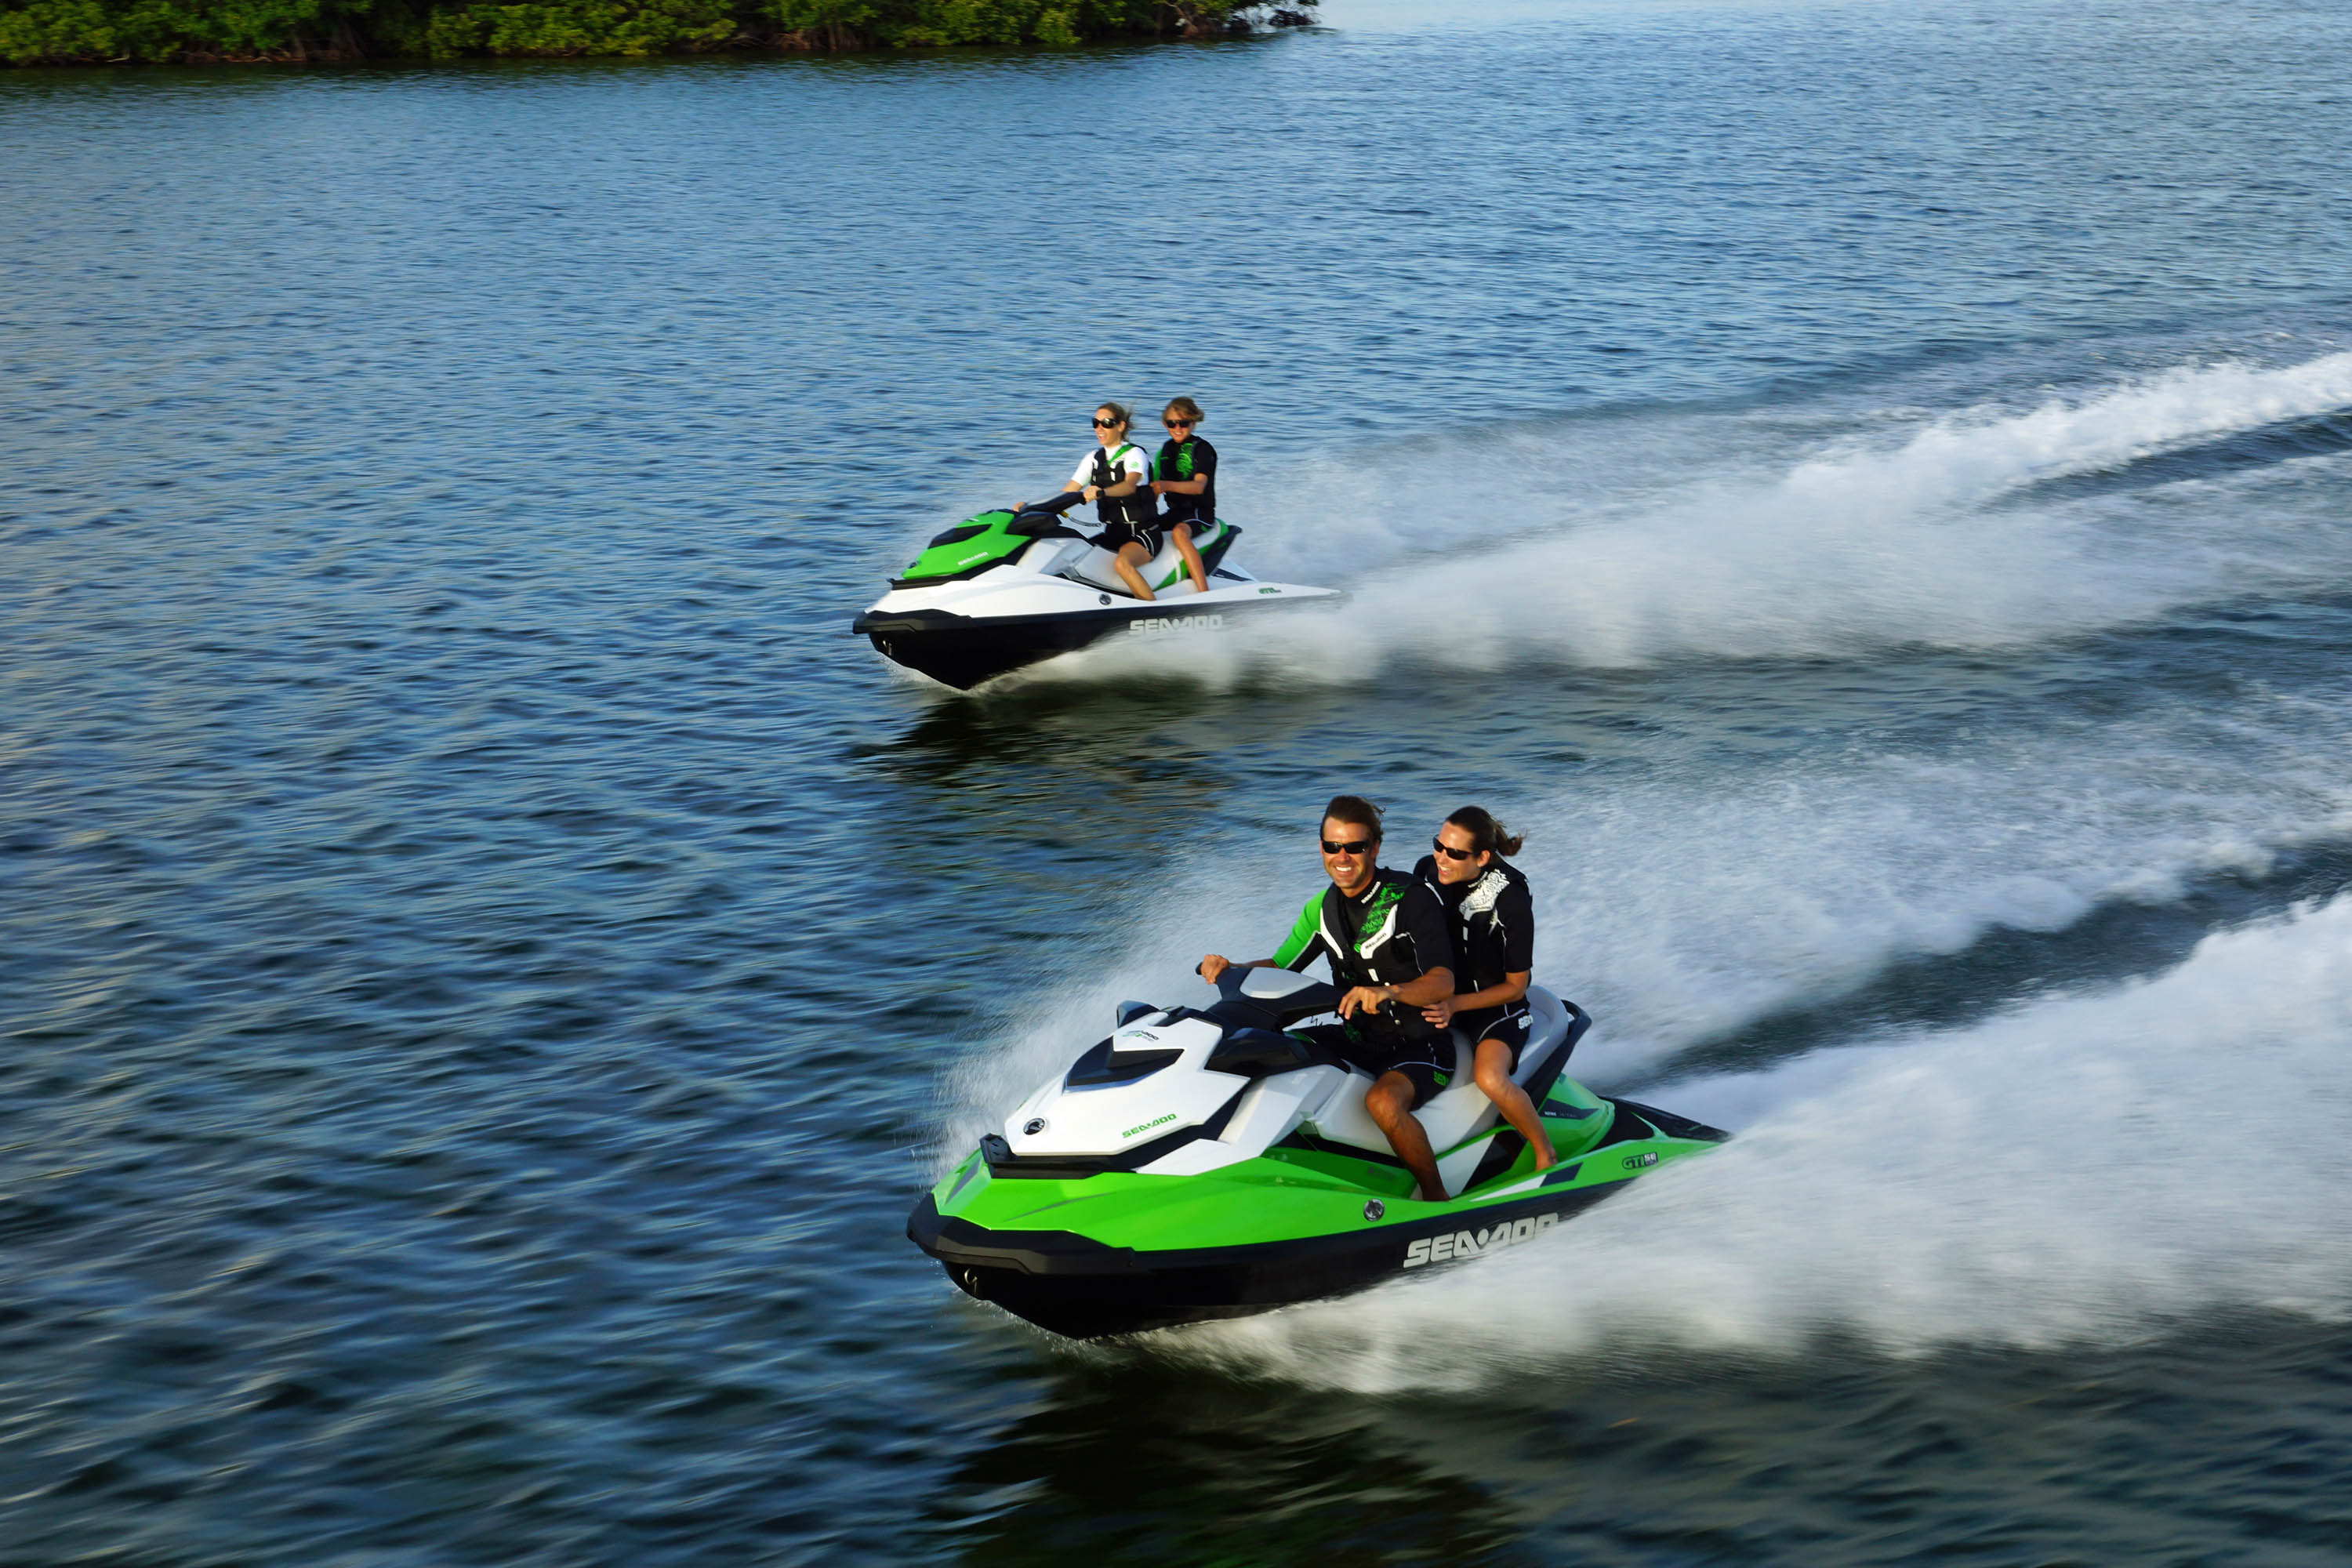 Amazing Sea-Doo Pictures & Backgrounds